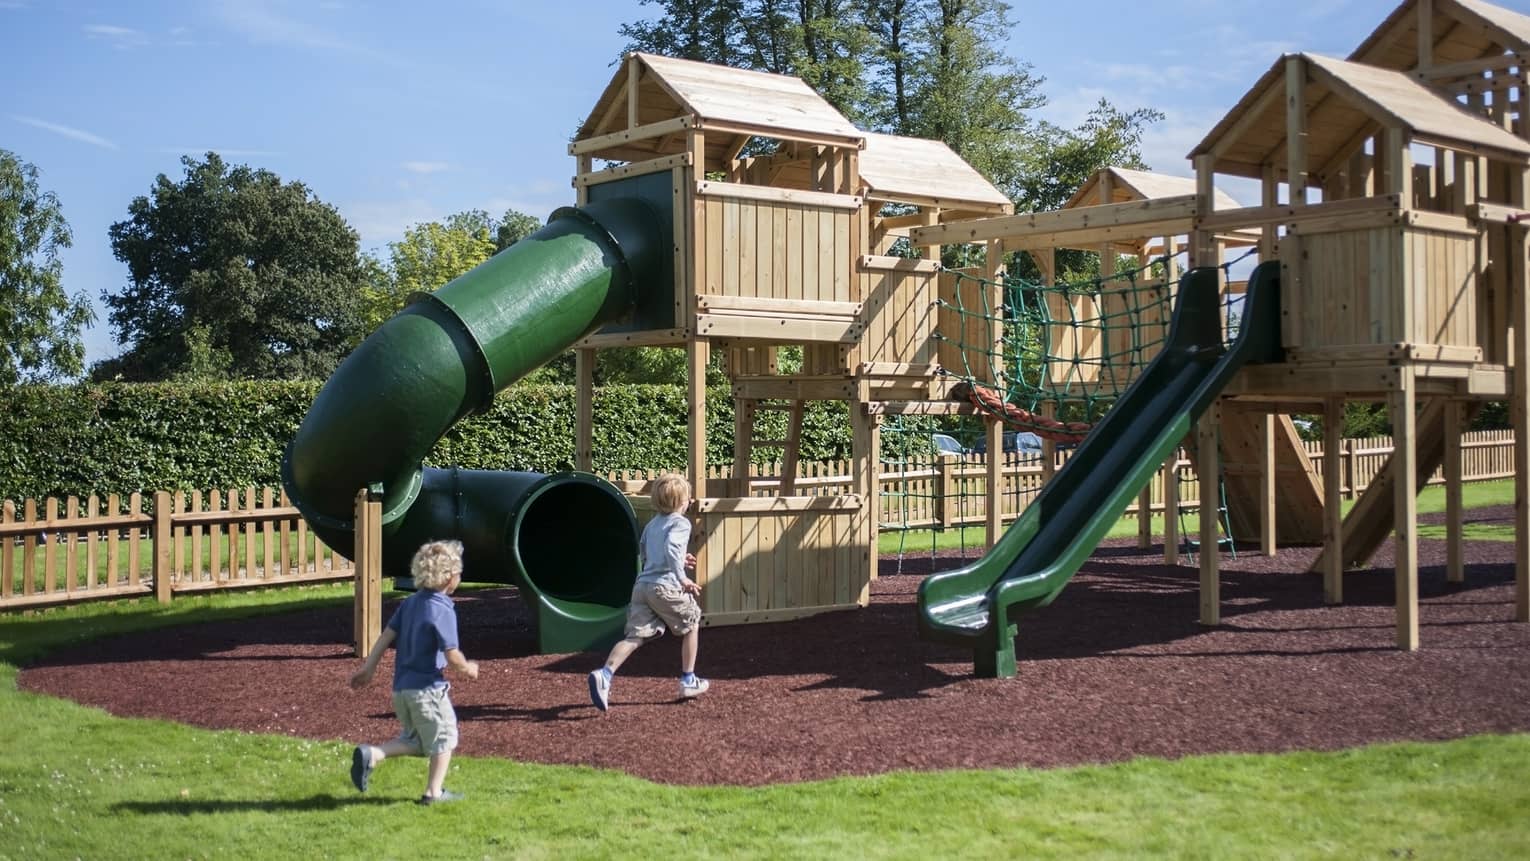 Two young children running towards a playgrounds on a sunny day outside.